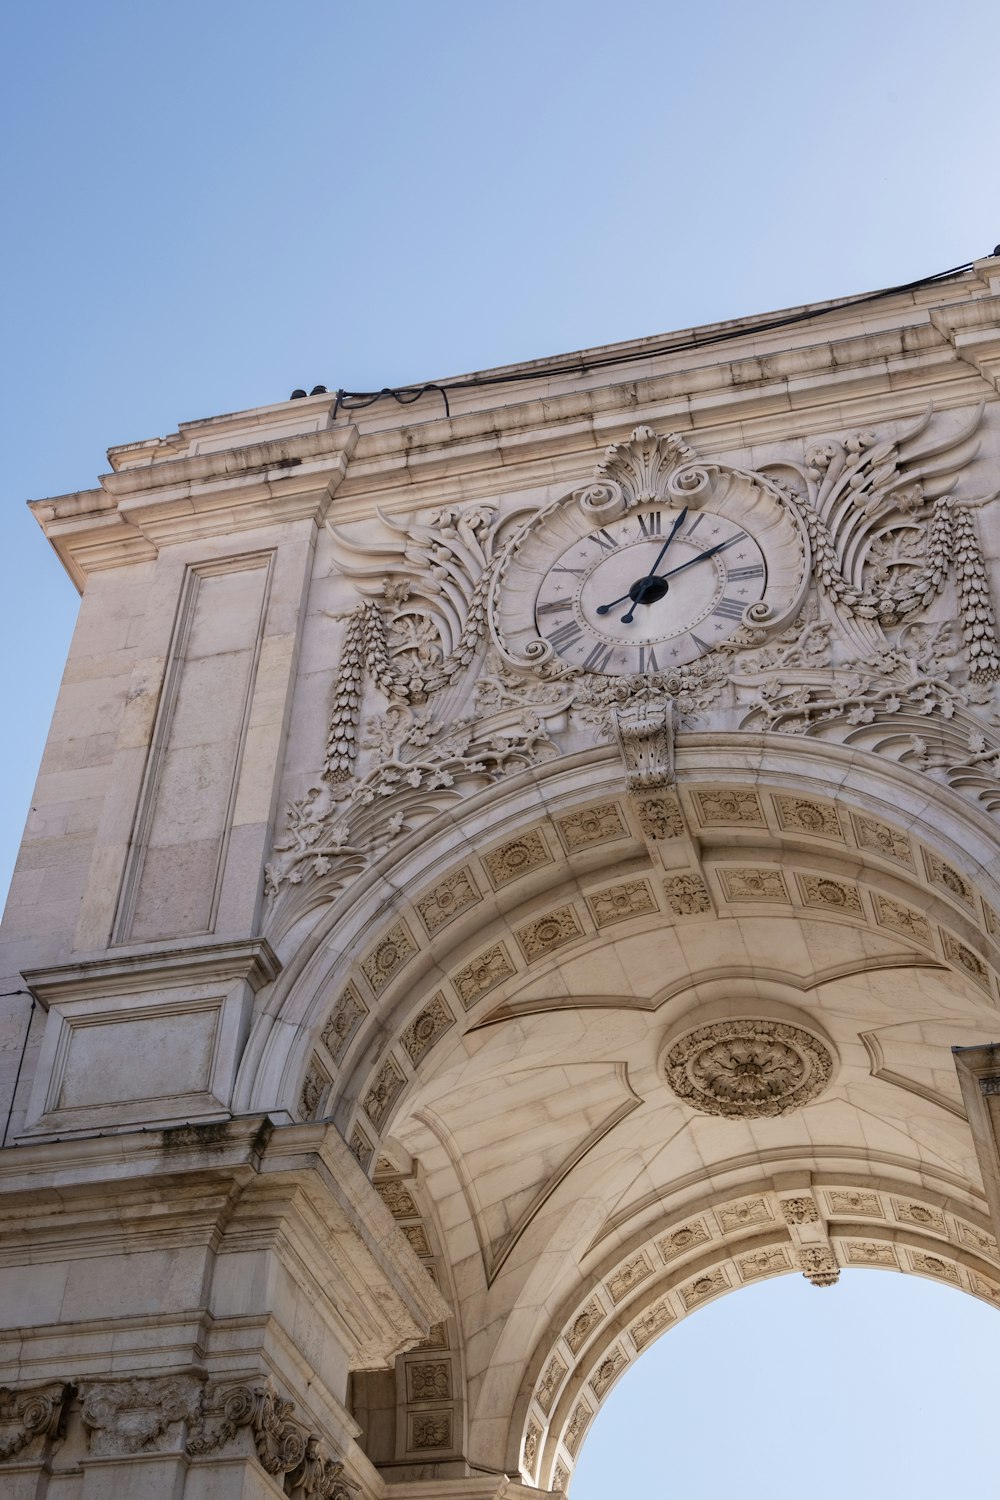 a clock mounted to the side of a stone arch